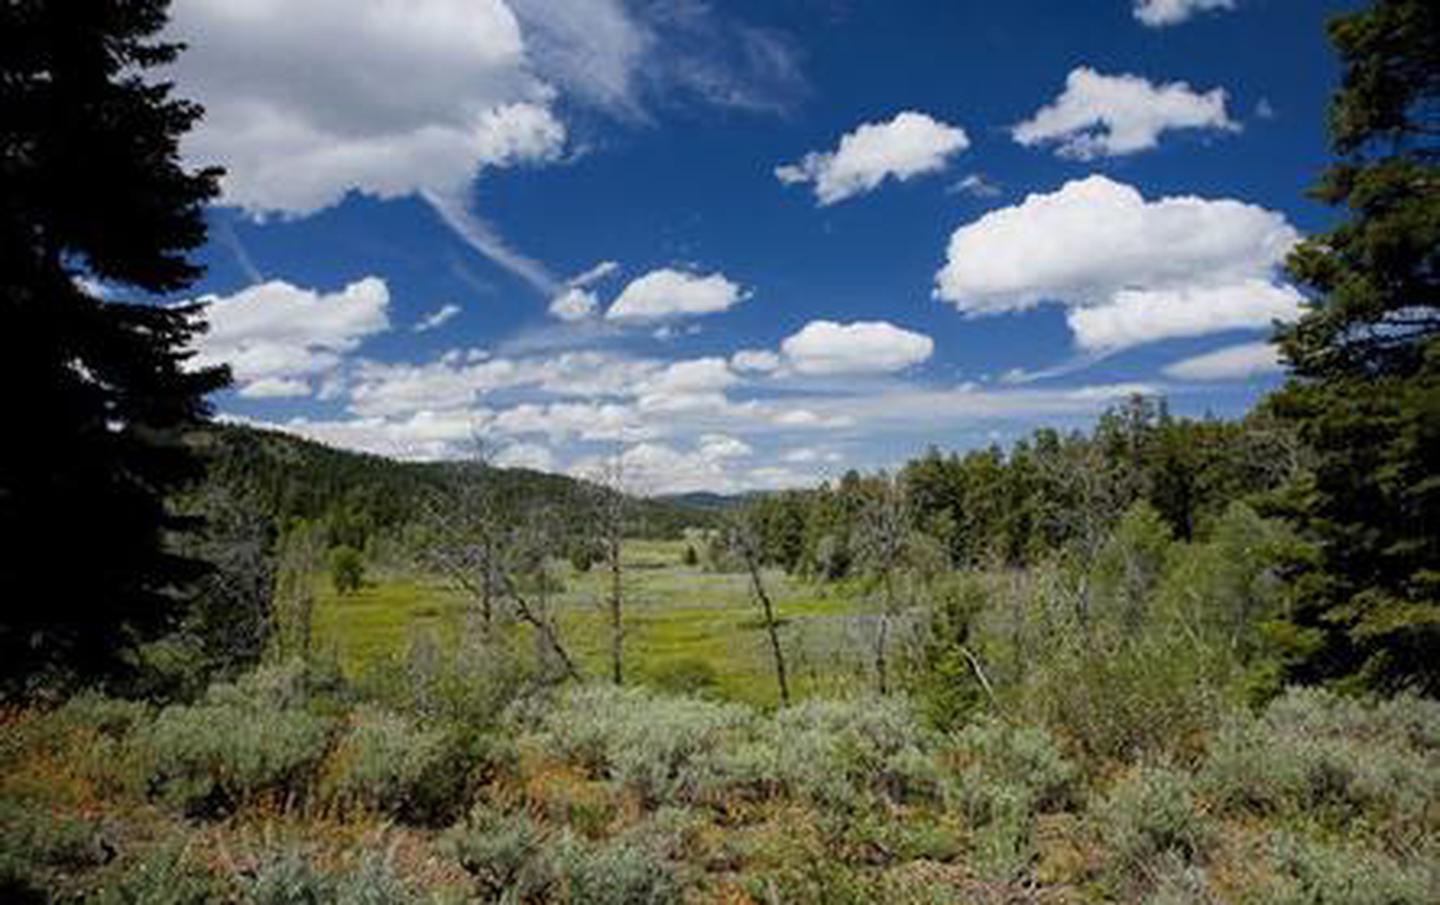 VIEWS ADJACENT TO ASPEN CABIN 2Fluffy white clouds in a blue sky above a meadow surrounded by sage and conifer trees.